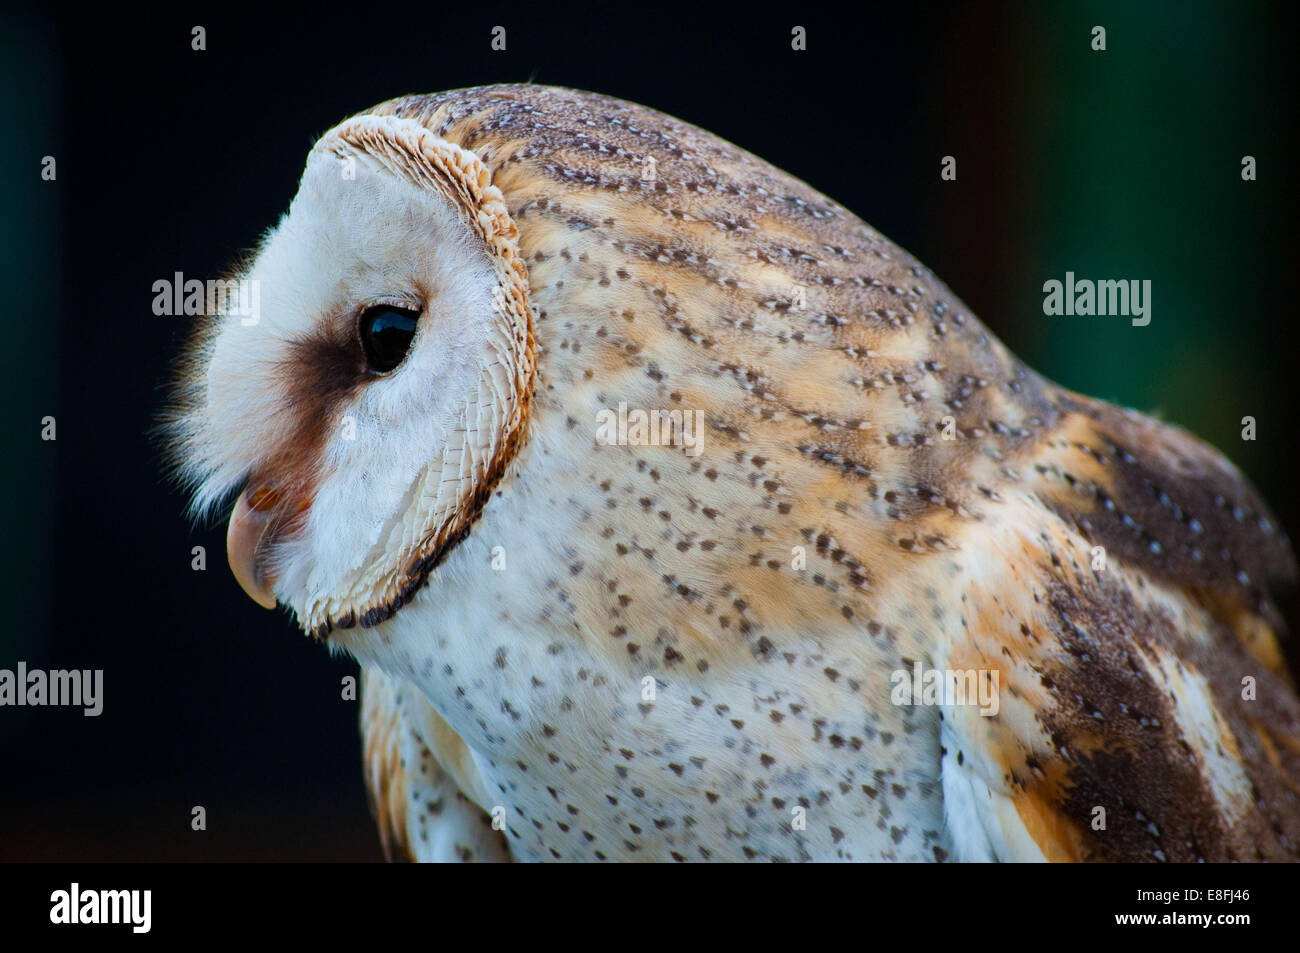 Close-up of Barn Owl, South Africa Stock Photo